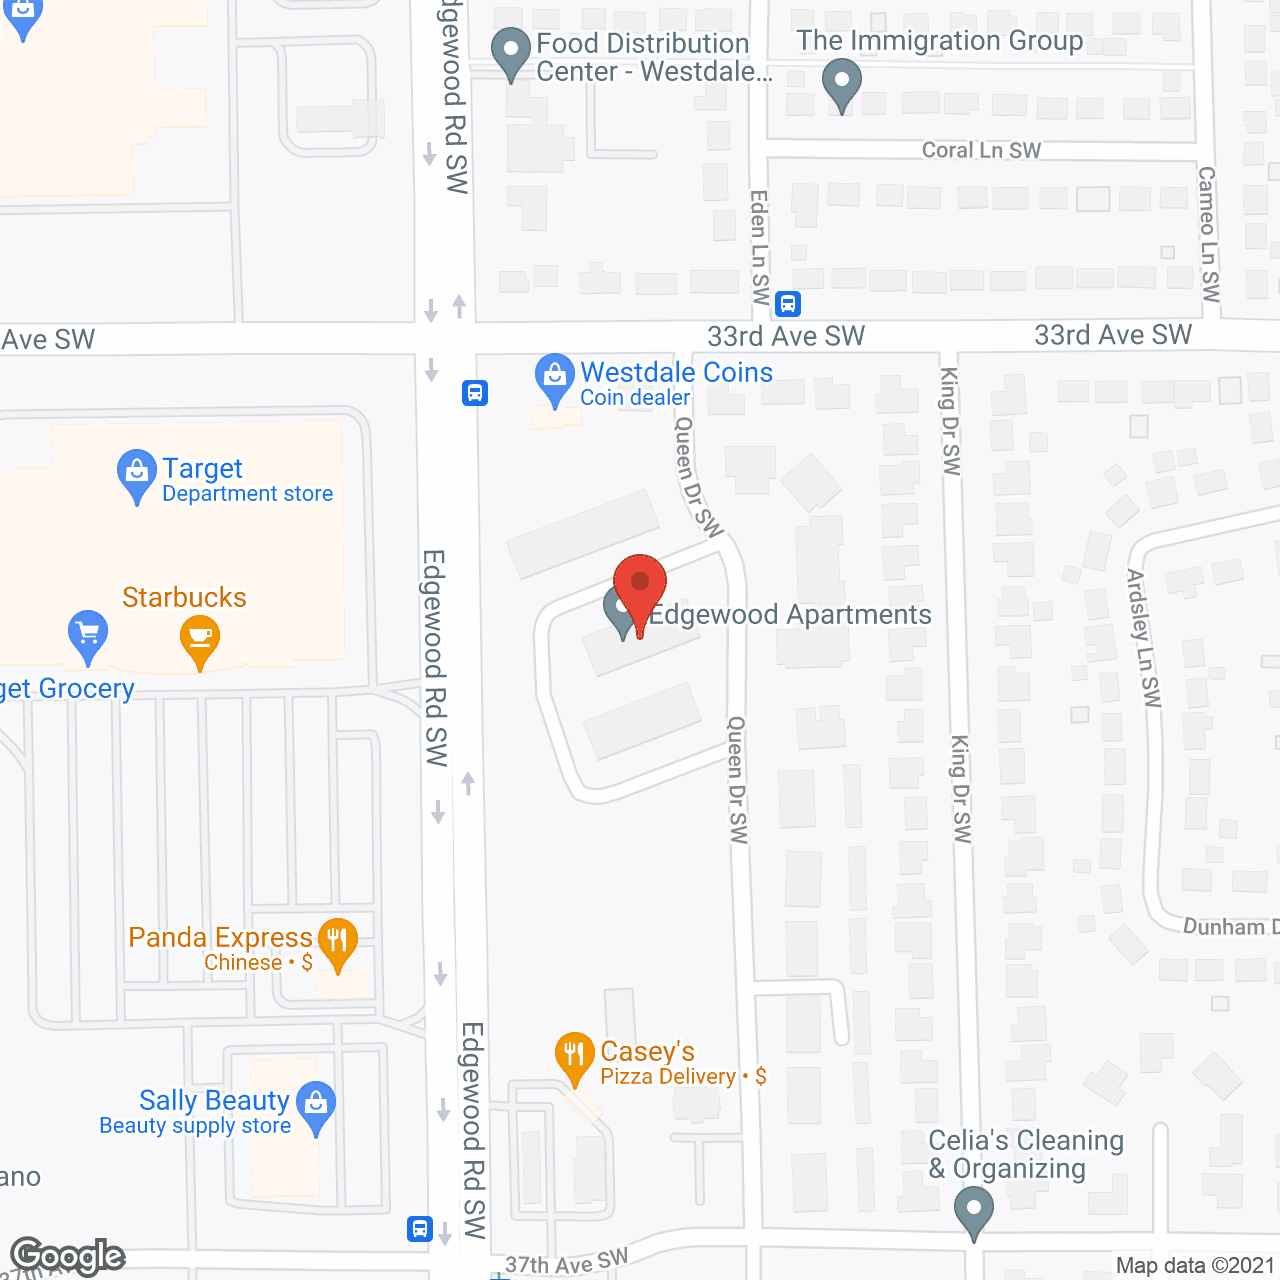 Edgewood Apartments in google map